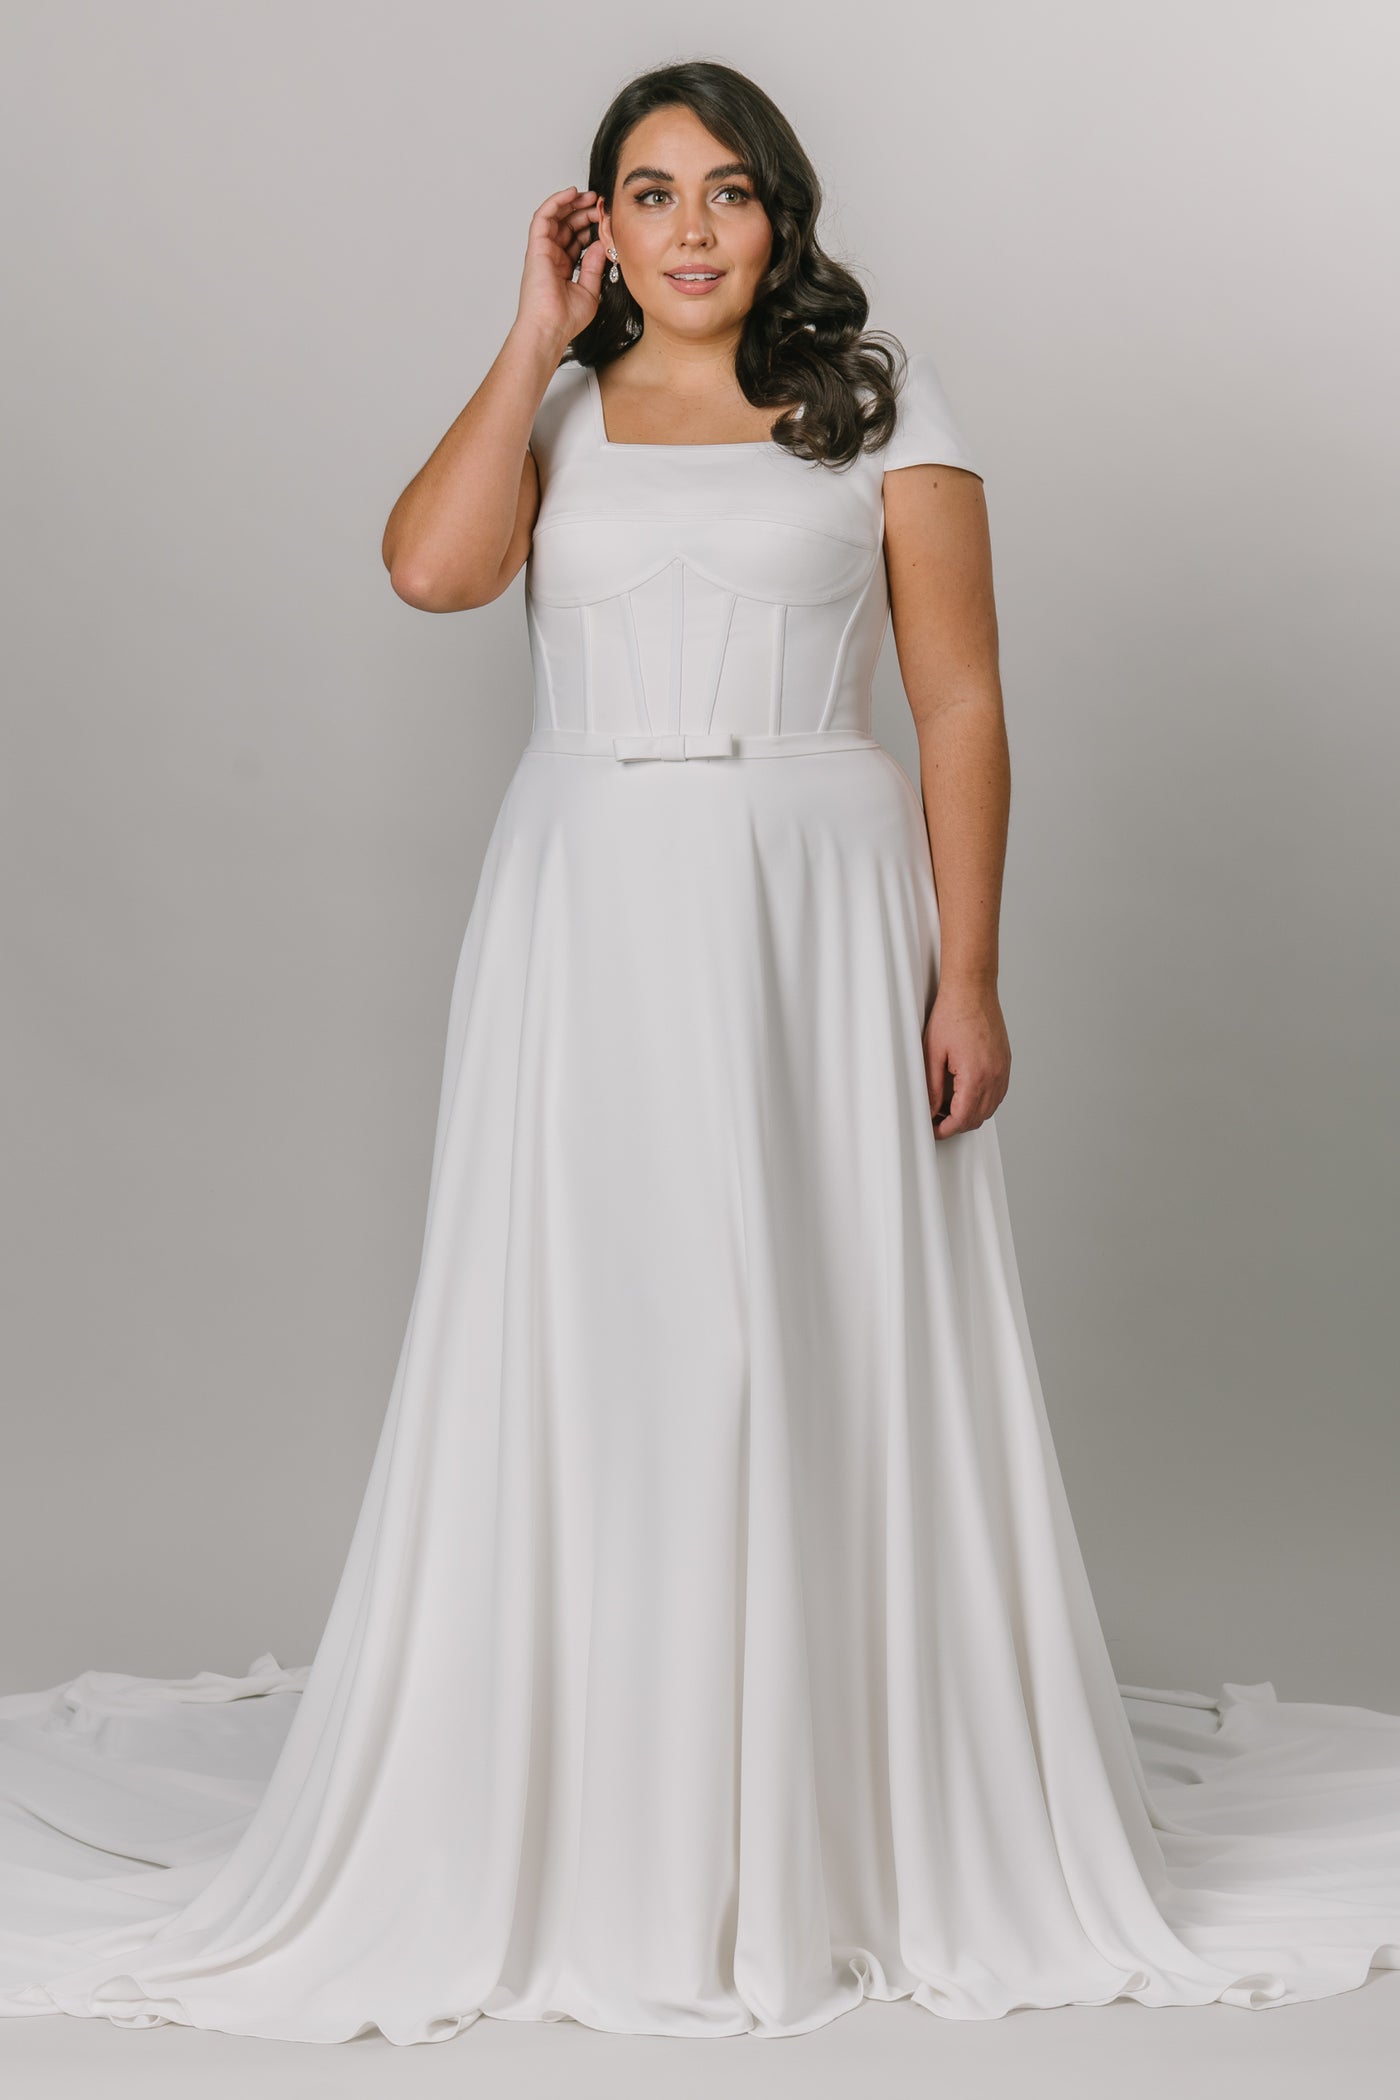 Plus size model wearing modest wedding dress that is a-line with a square neckline. It has a more constructed top with cap sleeves. 